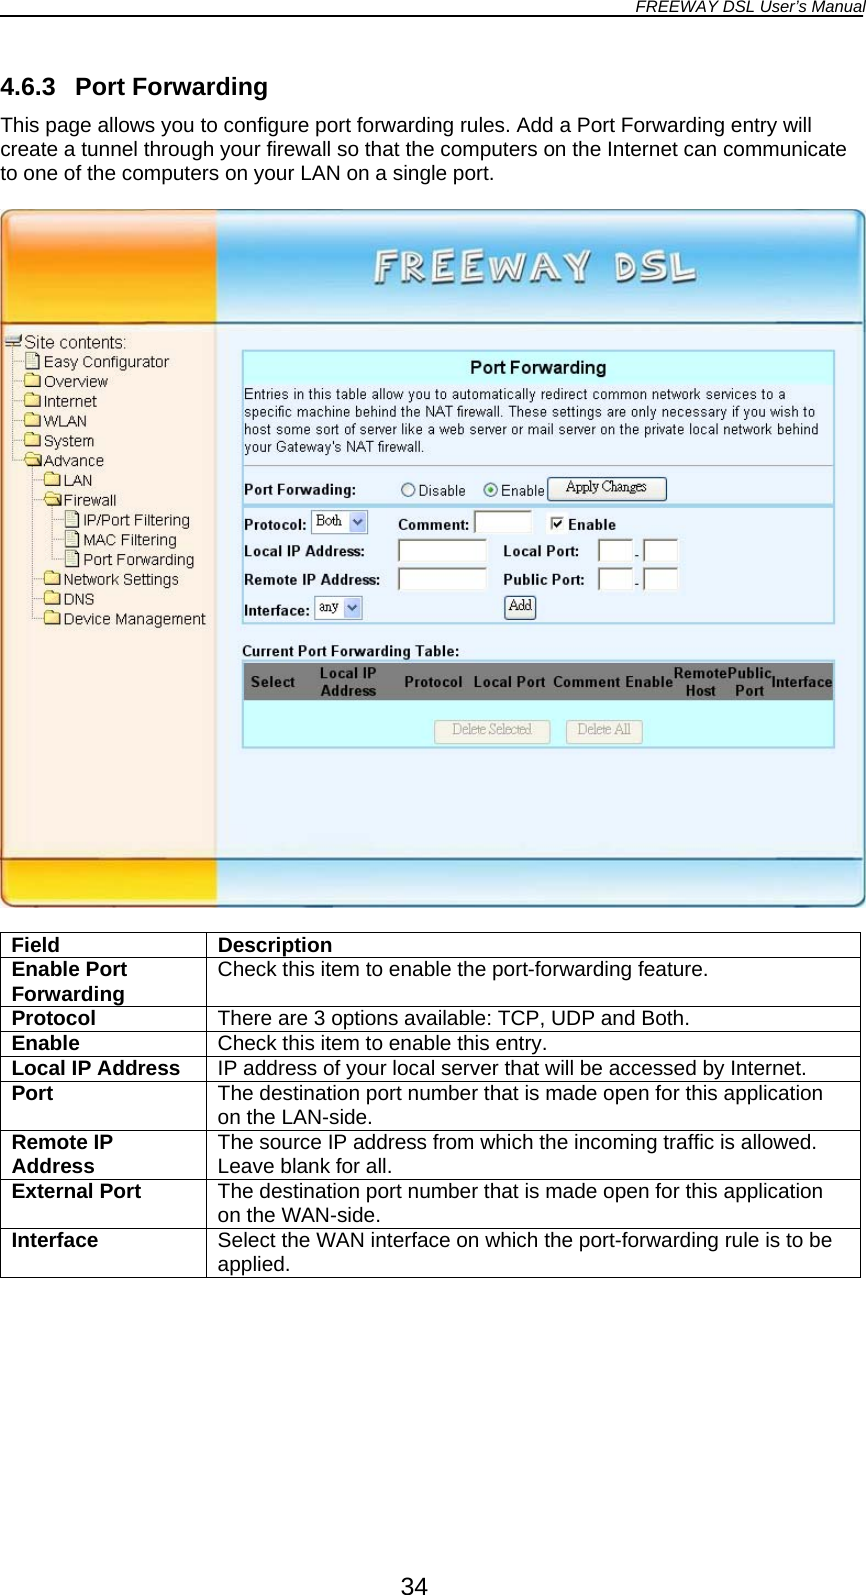 FREEWAY DSL User’s Manual  4.6.3 Port Forwarding This page allows you to configure port forwarding rules. Add a Port Forwarding entry will create a tunnel through your firewall so that the computers on the Internet can communicate to one of the computers on your LAN on a single port.    Field Description Enable Port Forwarding  Check this item to enable the port-forwarding feature. Protocol  There are 3 options available: TCP, UDP and Both. Enable  Check this item to enable this entry. Local IP Address  IP address of your local server that will be accessed by Internet. Port  The destination port number that is made open for this application on the LAN-side. Remote IP Address  The source IP address from which the incoming traffic is allowed. Leave blank for all. External Port  The destination port number that is made open for this application on the WAN-side. Interface  Select the WAN interface on which the port-forwarding rule is to be applied.   34 